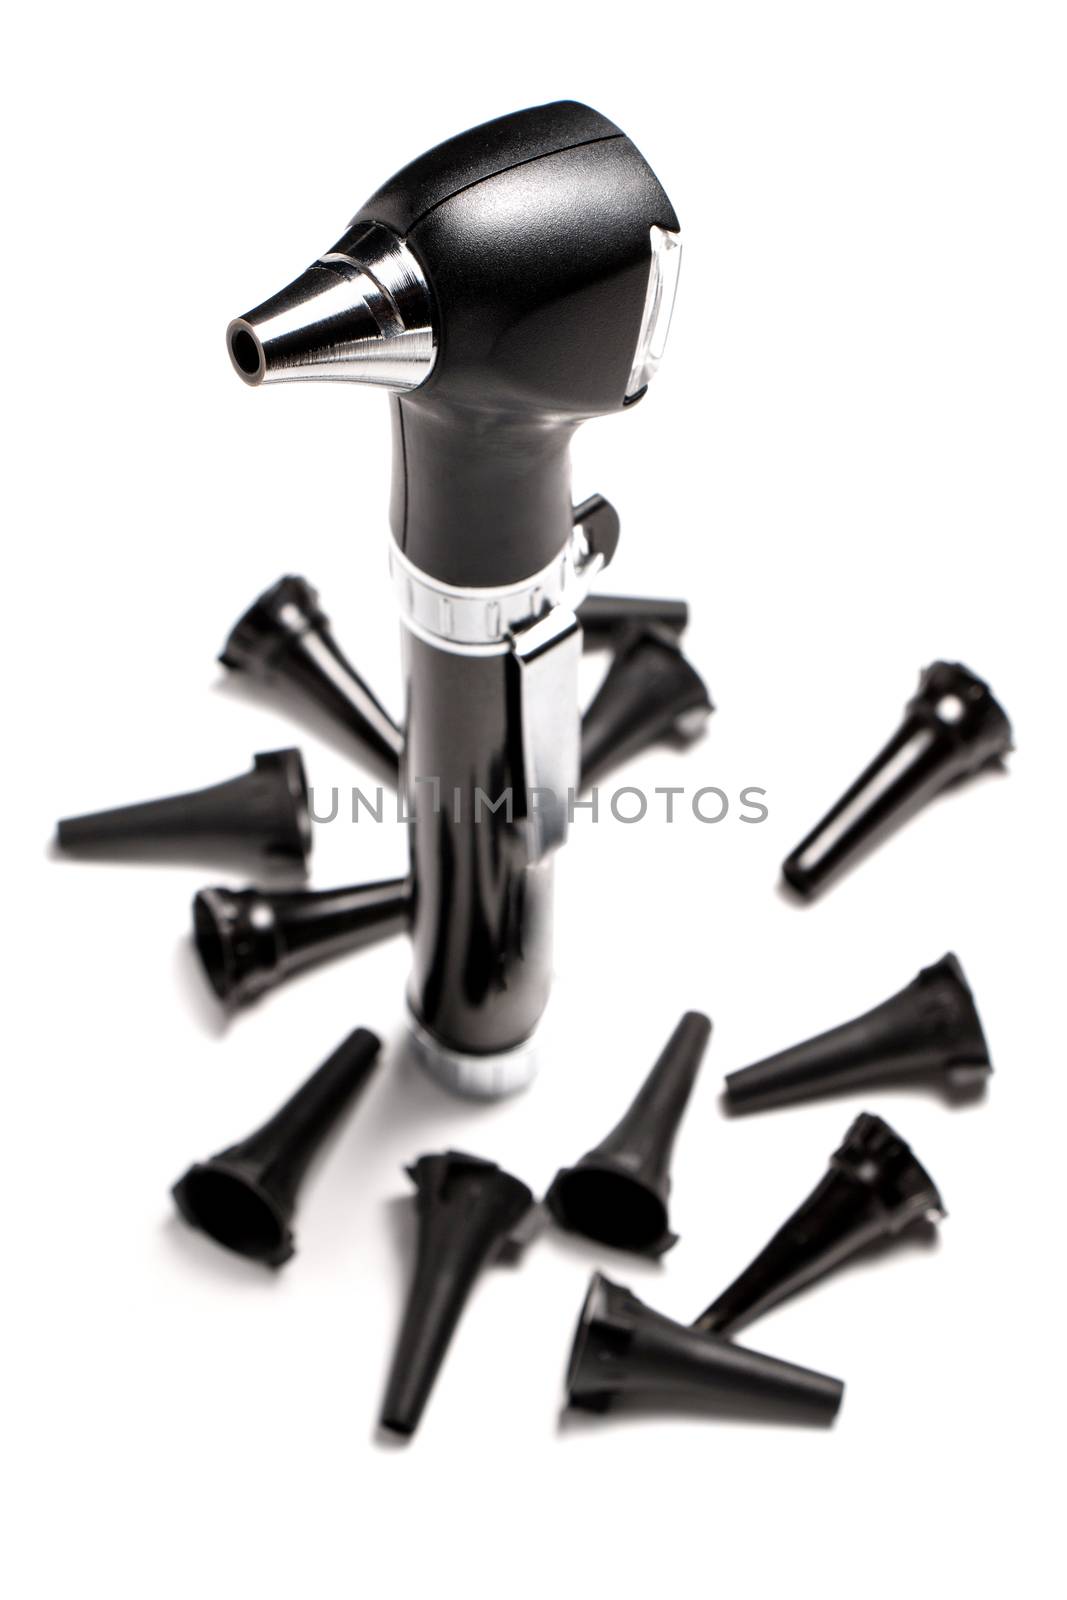 Otoscope is a medical instrument 